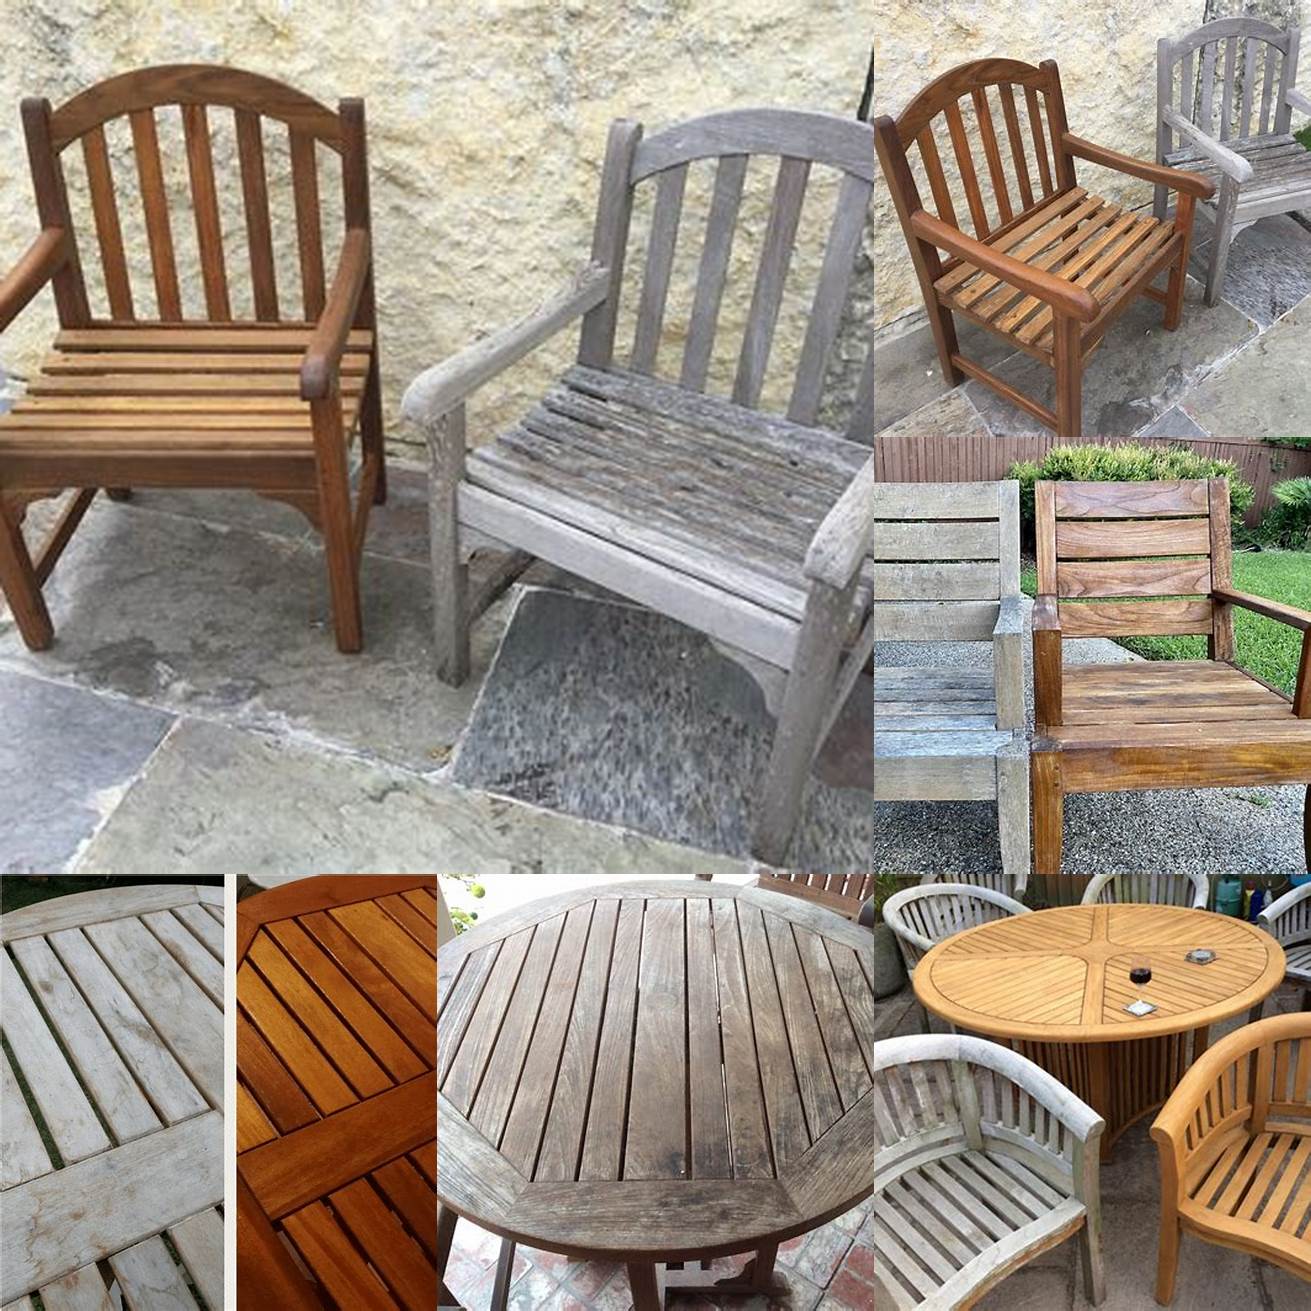 Before and After Photos of Different Types of Teak Furniture